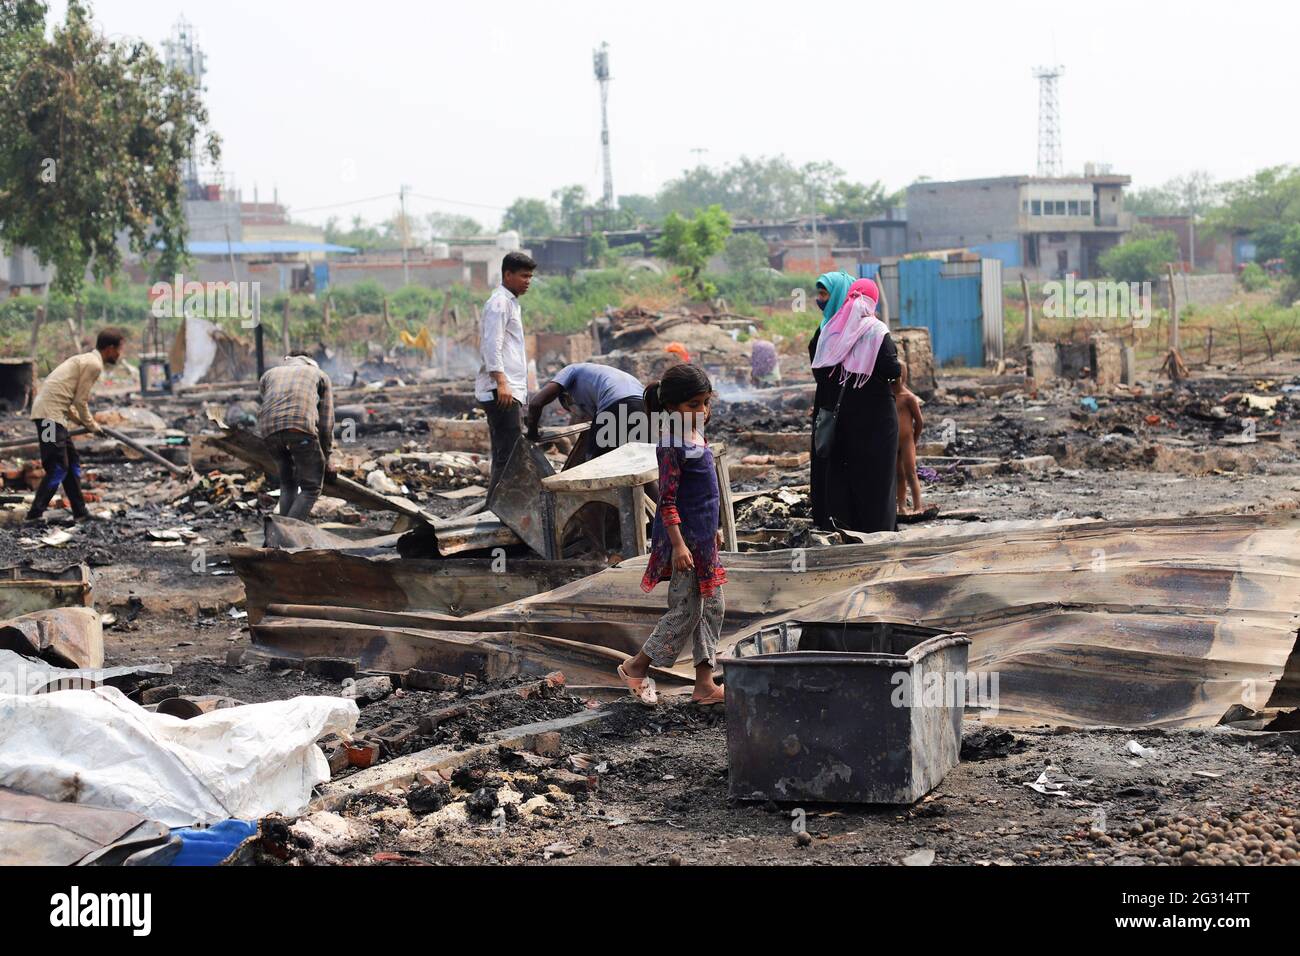 New Delhi, India. 13th June, 2021. A kid seen look around the charred remains of their camp, during the aftermath. A fire incident broke out at the Rohingya refugee camp leaving over 50 shanties of Rohingya refugees gutted. The cause of the fire has not yet been established. Credit: SOPA Images Limited/Alamy Live News Stock Photo